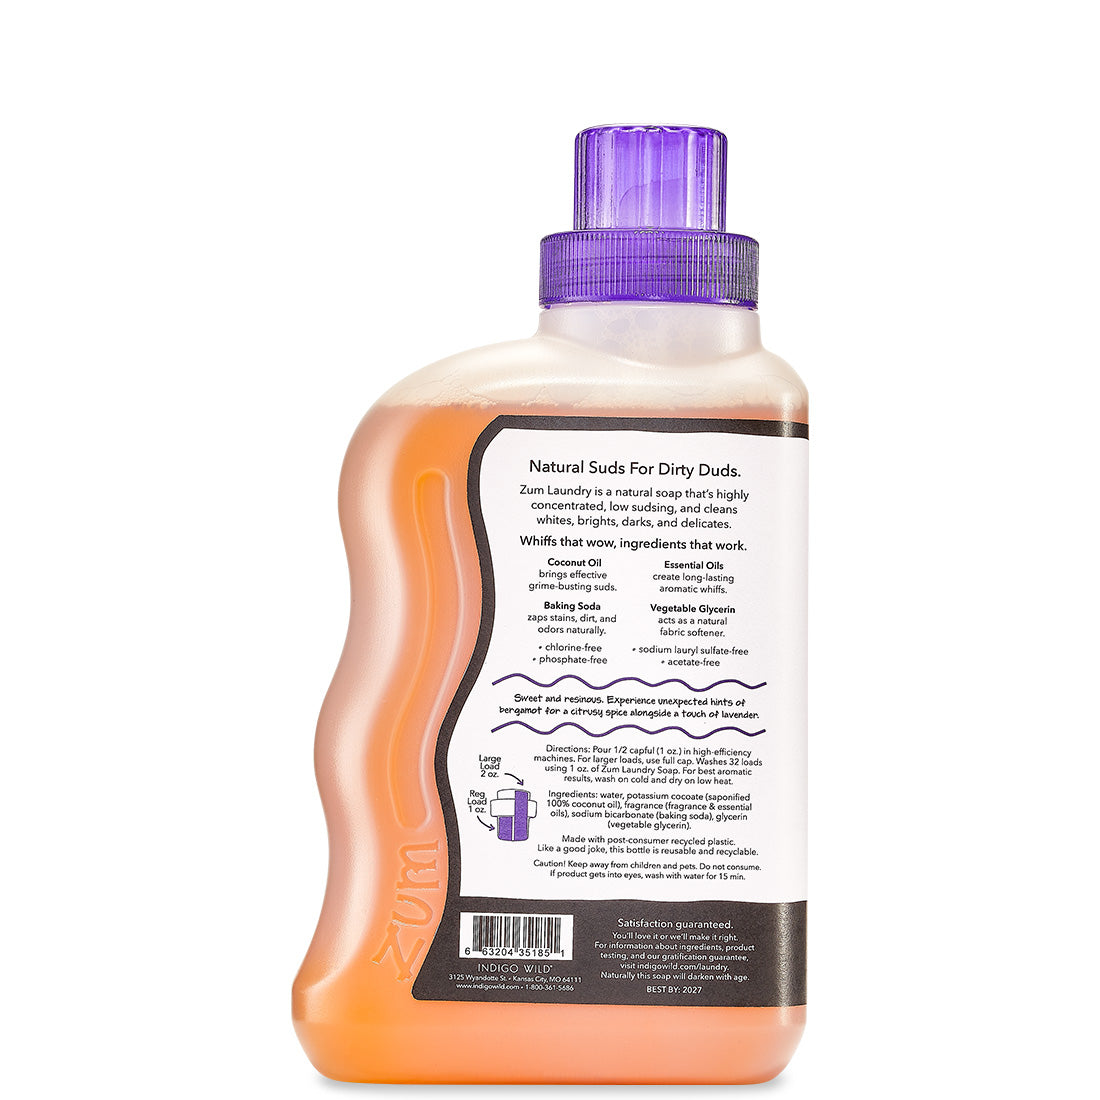 Back view of Plastic bottle with purple cap containing Amber scented laundry soap liquid